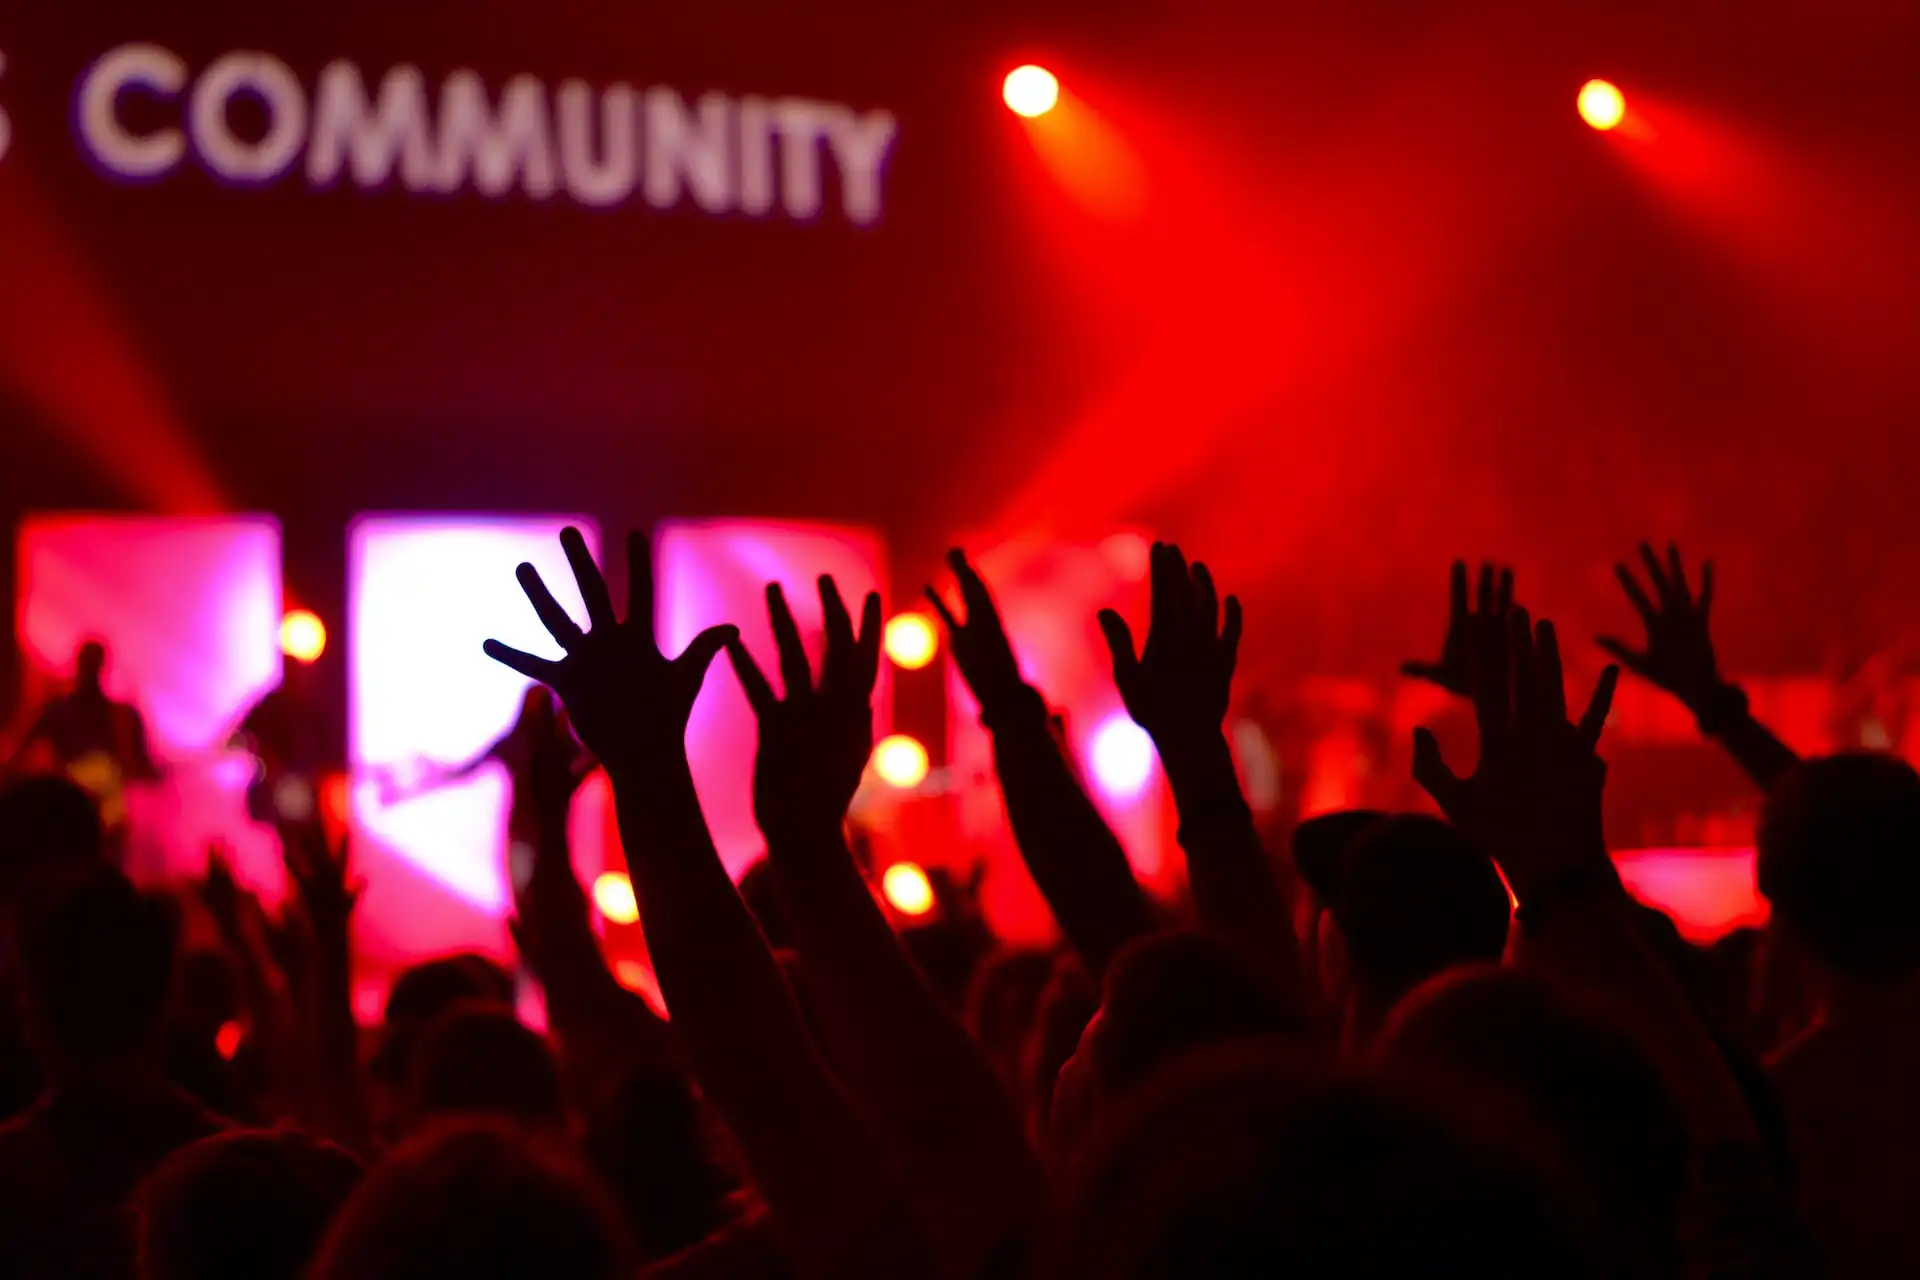 How to build a vibrant online community